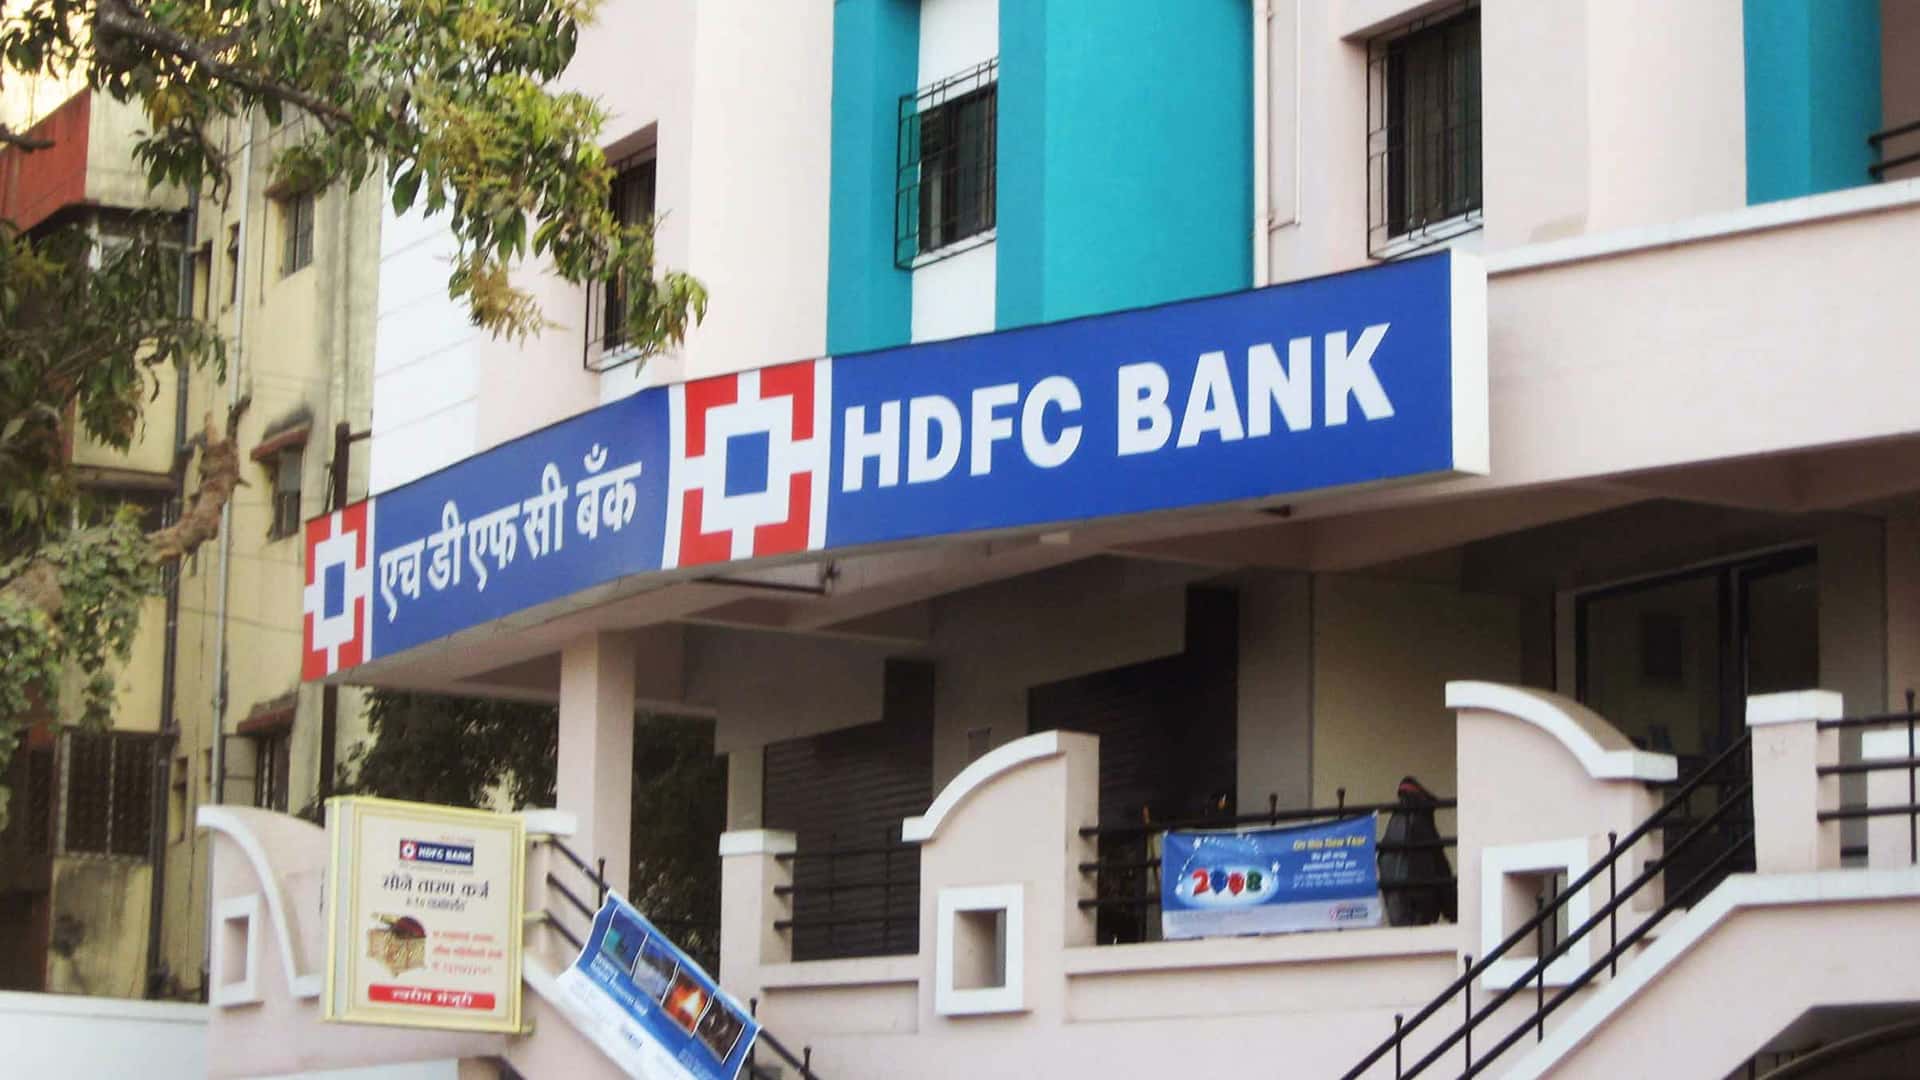 Actions against HDFC Bank, Mastercard driven by keenness to ensure compliance of norms: Das